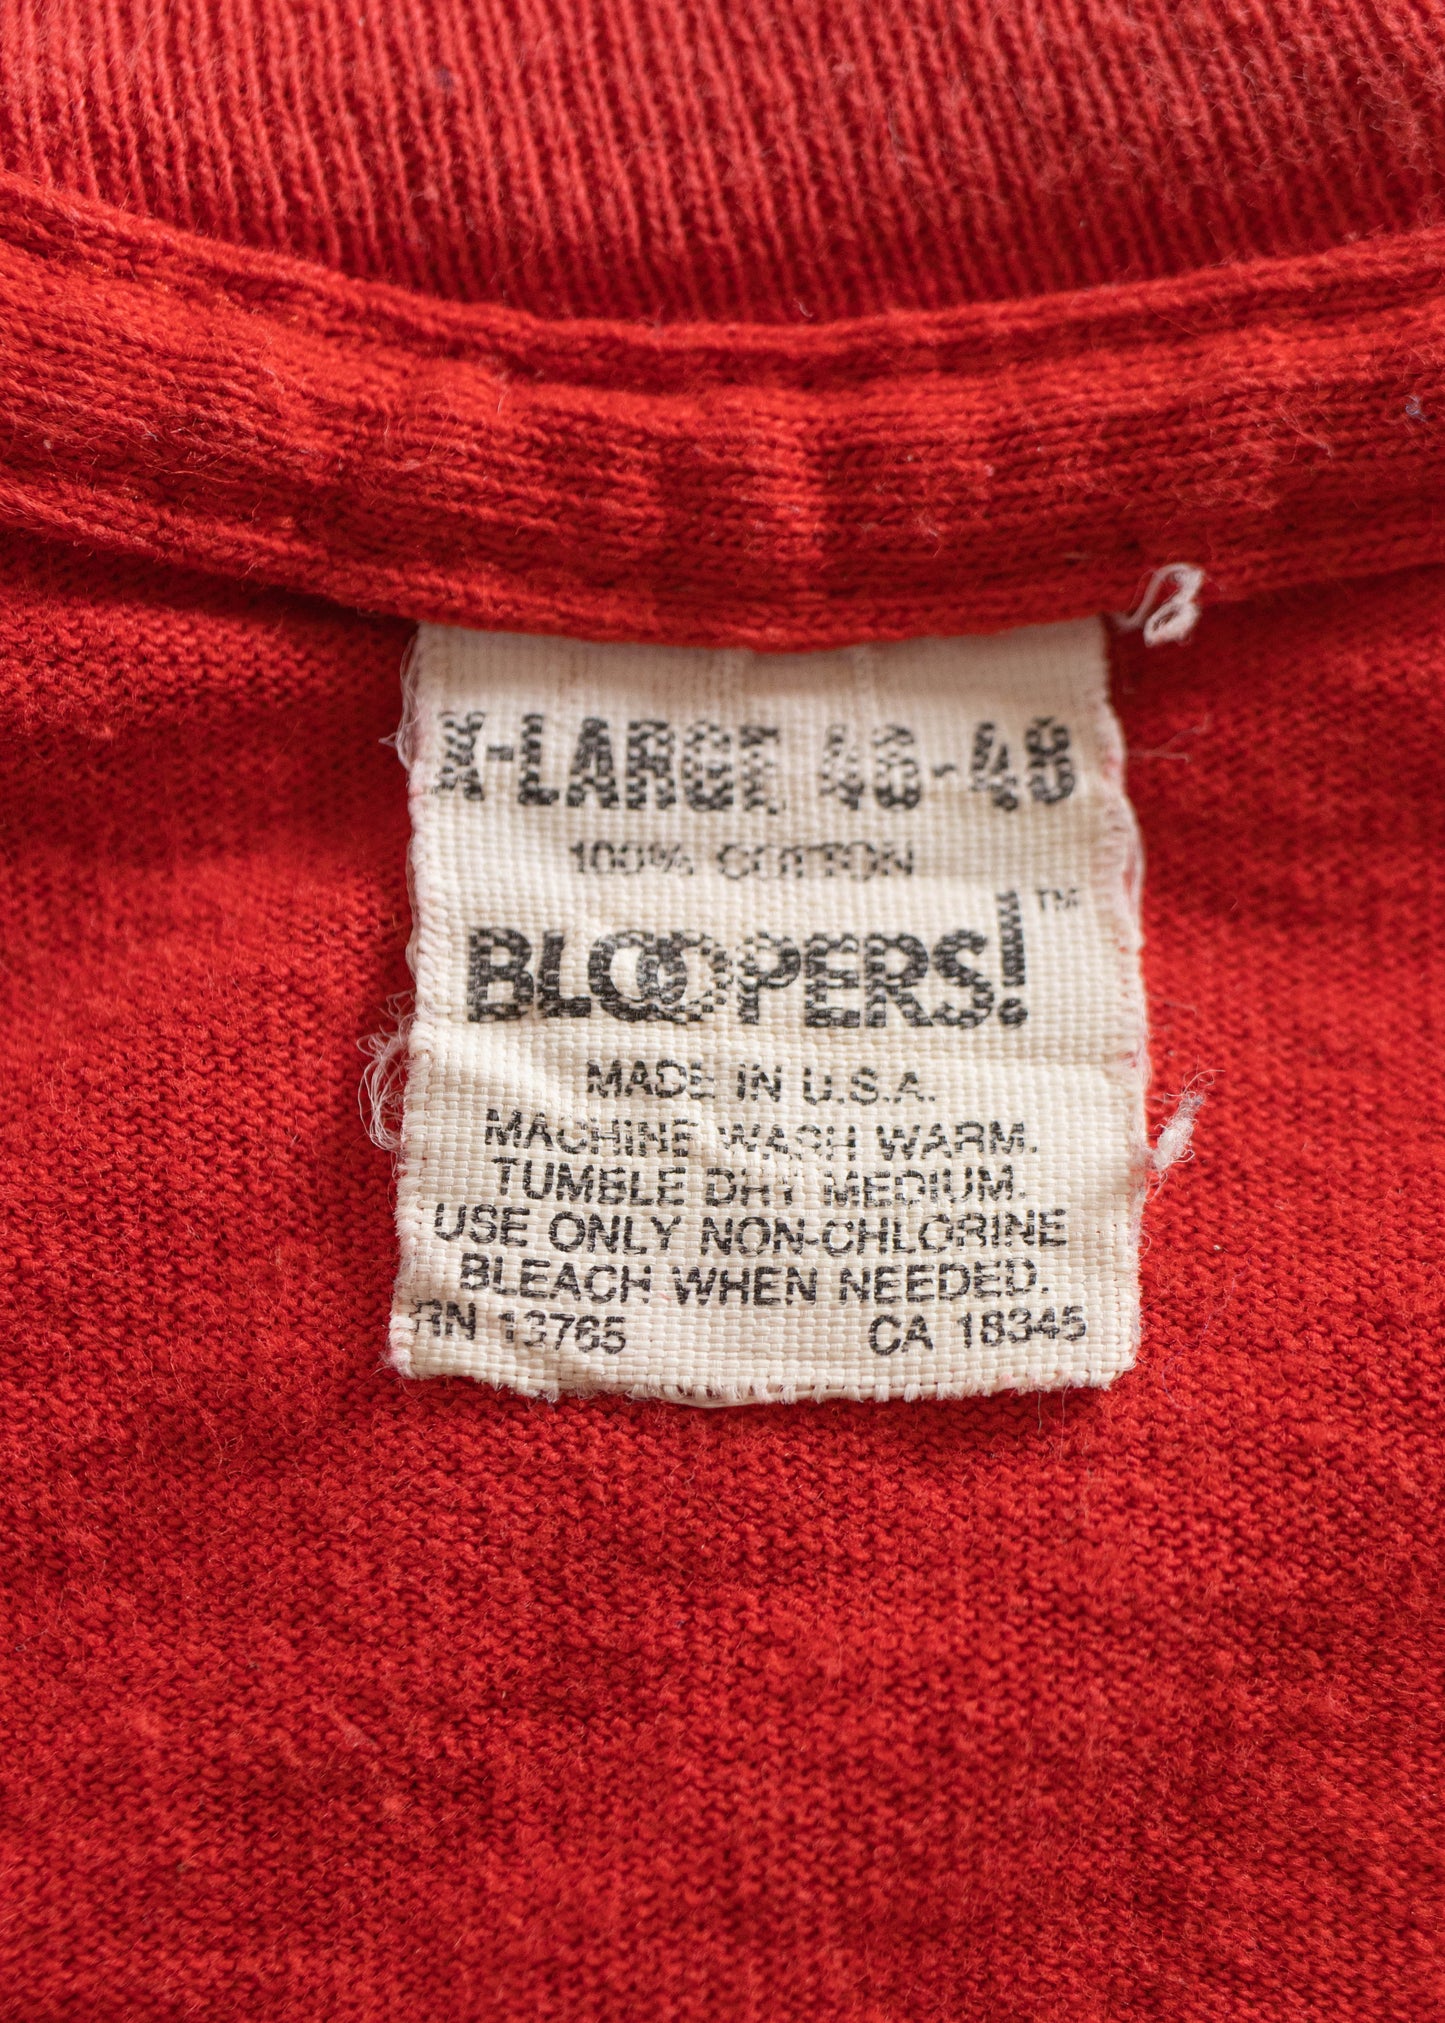 1980s Bloopers Selvedge Pocket T-Shirt Size M/L